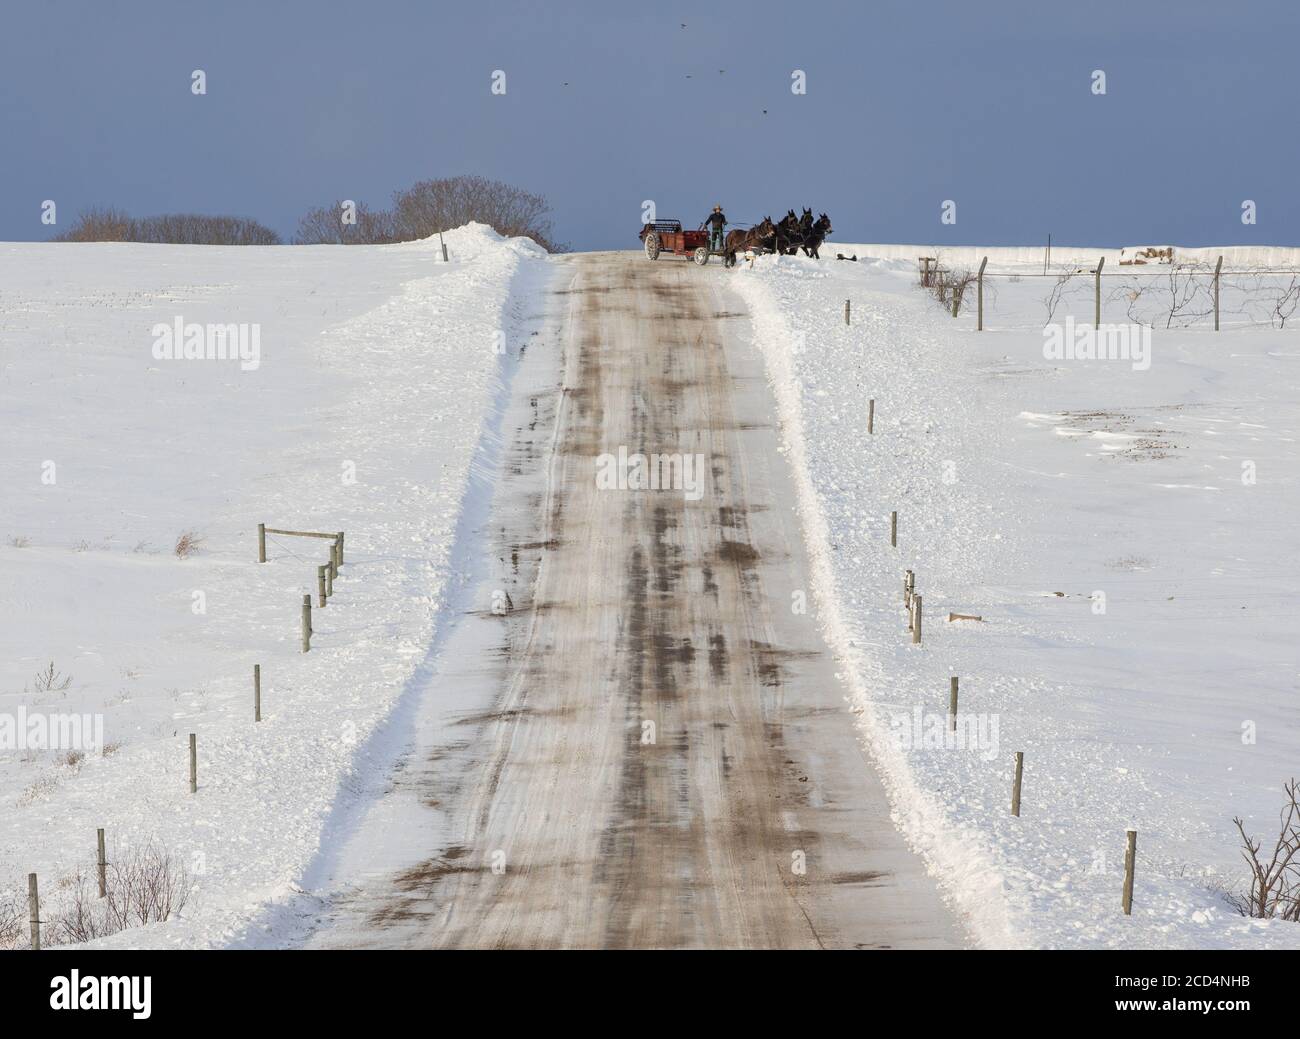 Mohawk Valley, New York State: Amish farmer drives a team of four horses to retrieve hay, over snow-covered fields and roads. Stock Photo